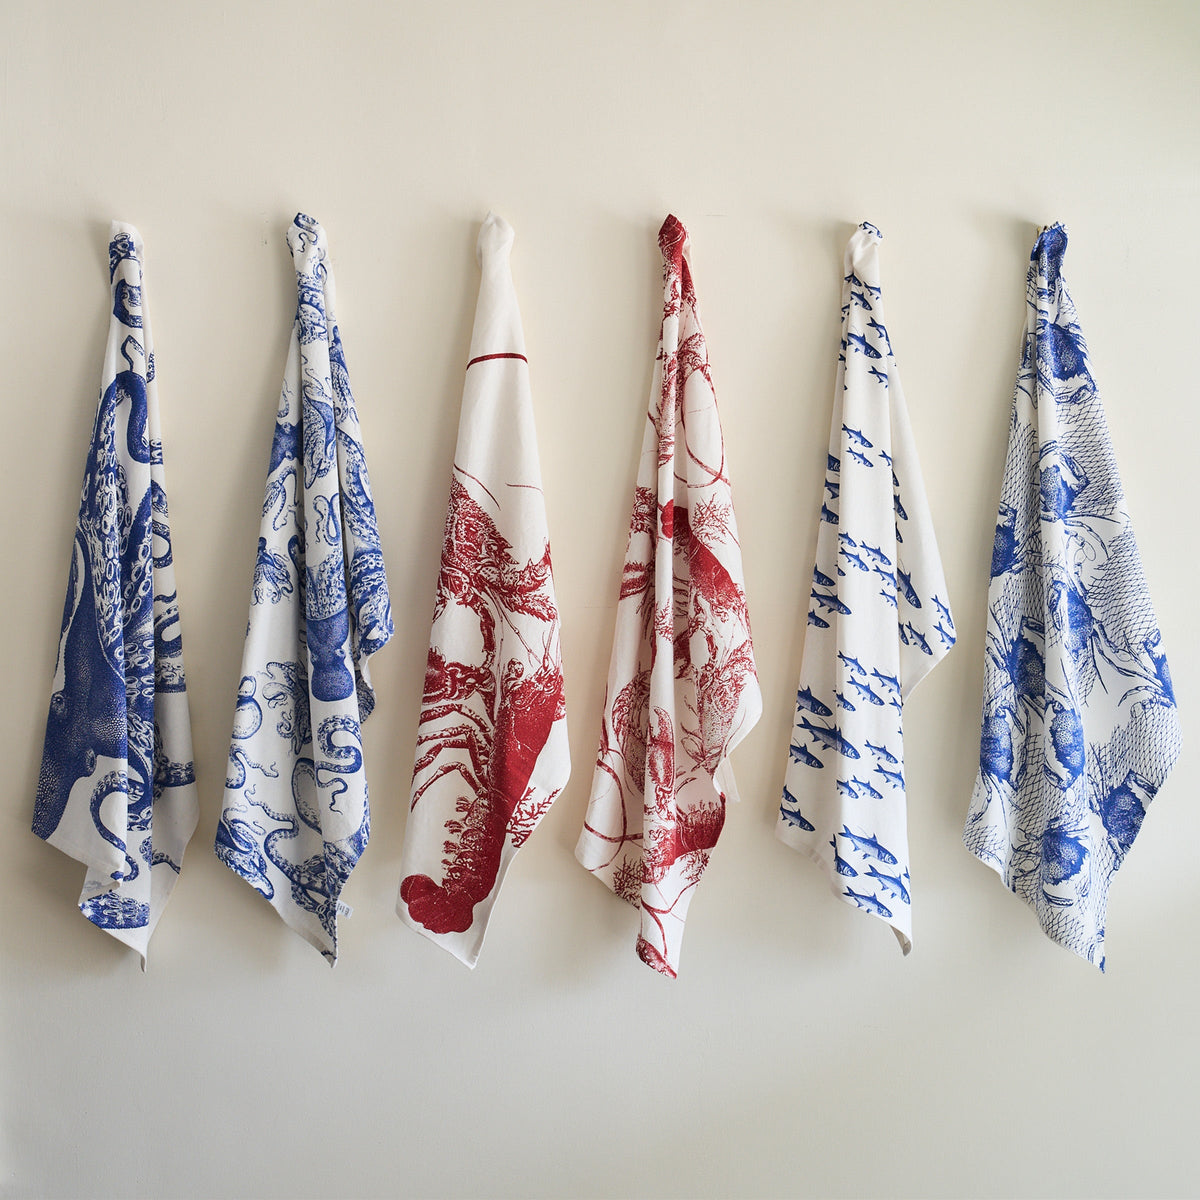 Six Lucy Kitchen Towels, Set of 2 by Caskata in blue and red hues hang neatly on hooks against a white wall.